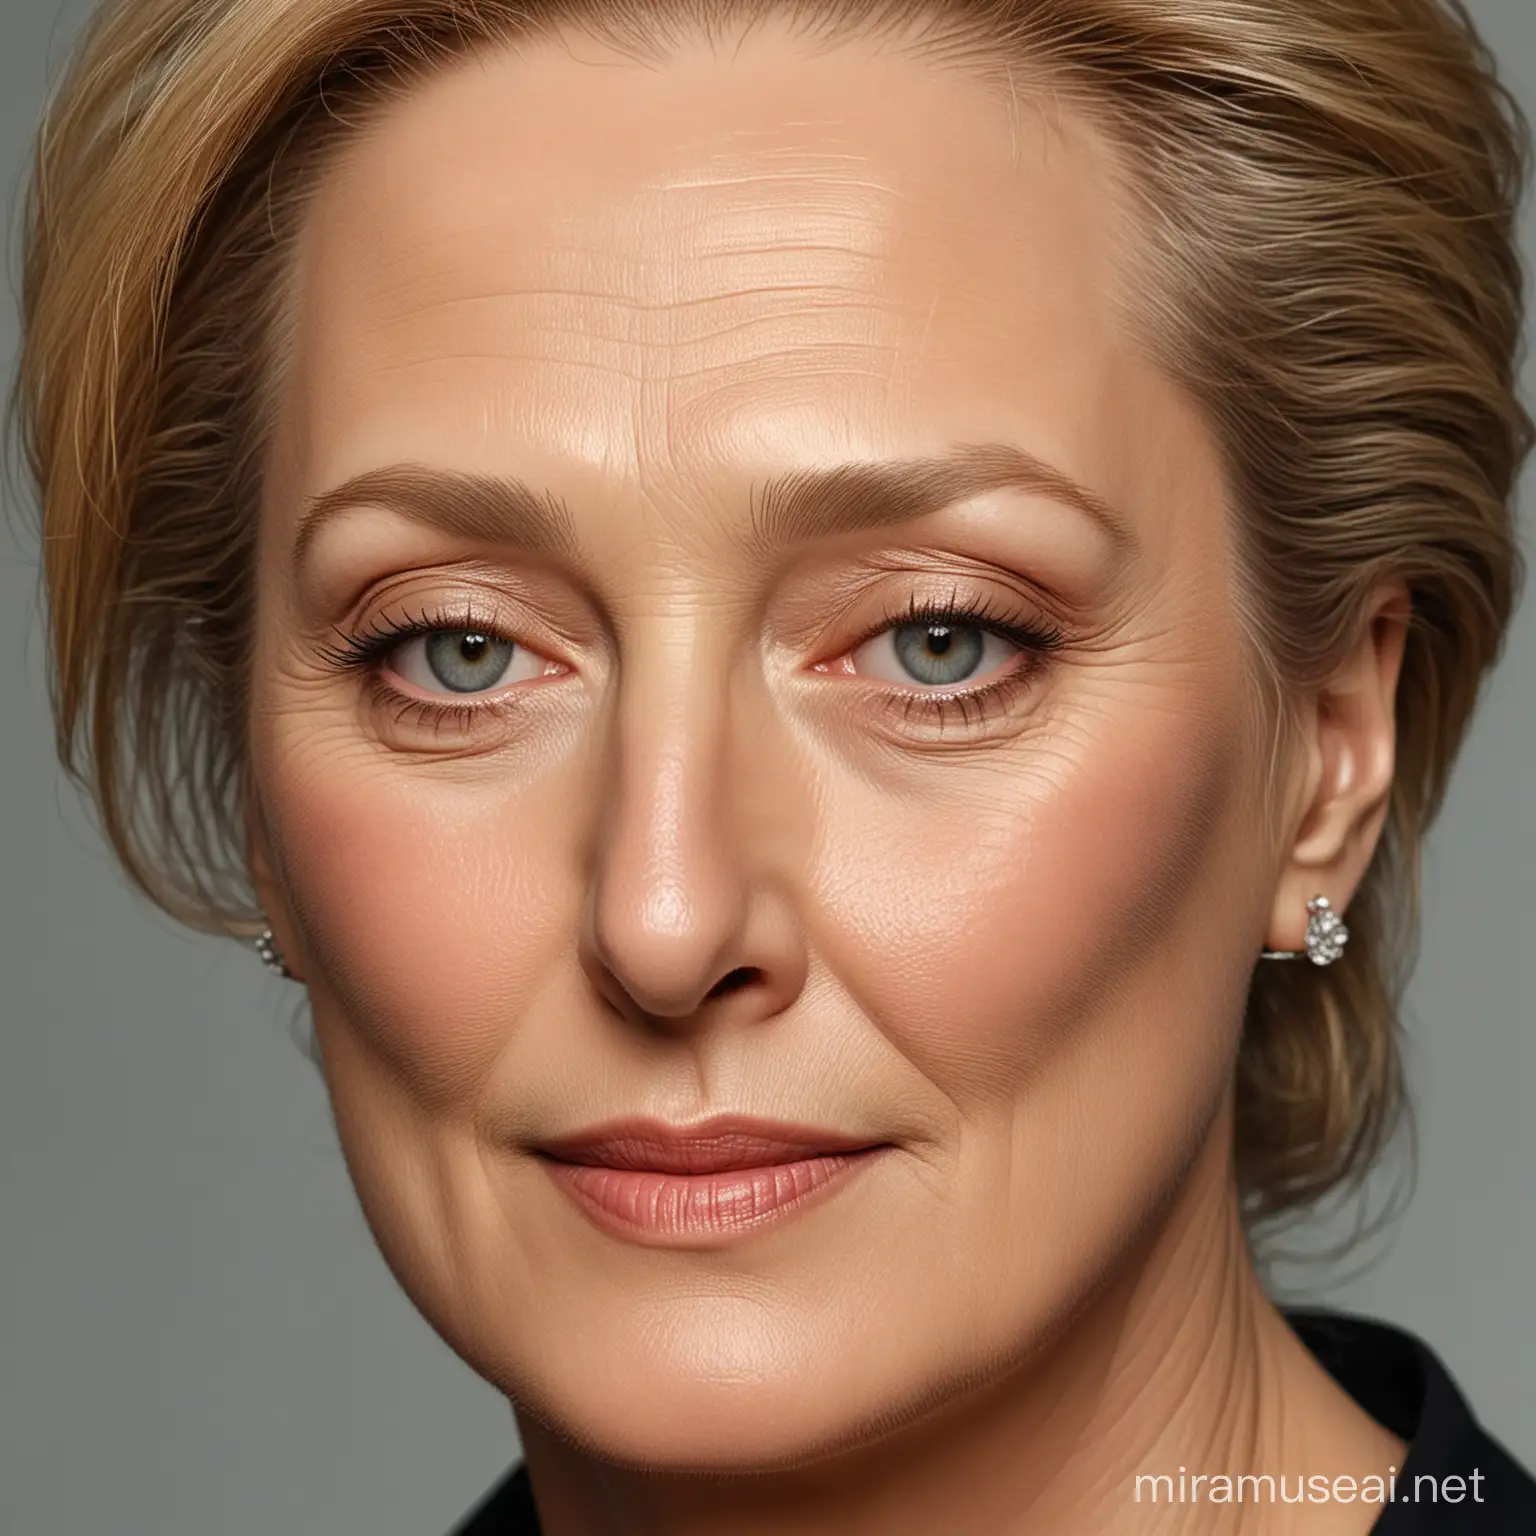 Detailed Realistic Portrait of Meryl Streep Natural Aging Woman in High Resolution